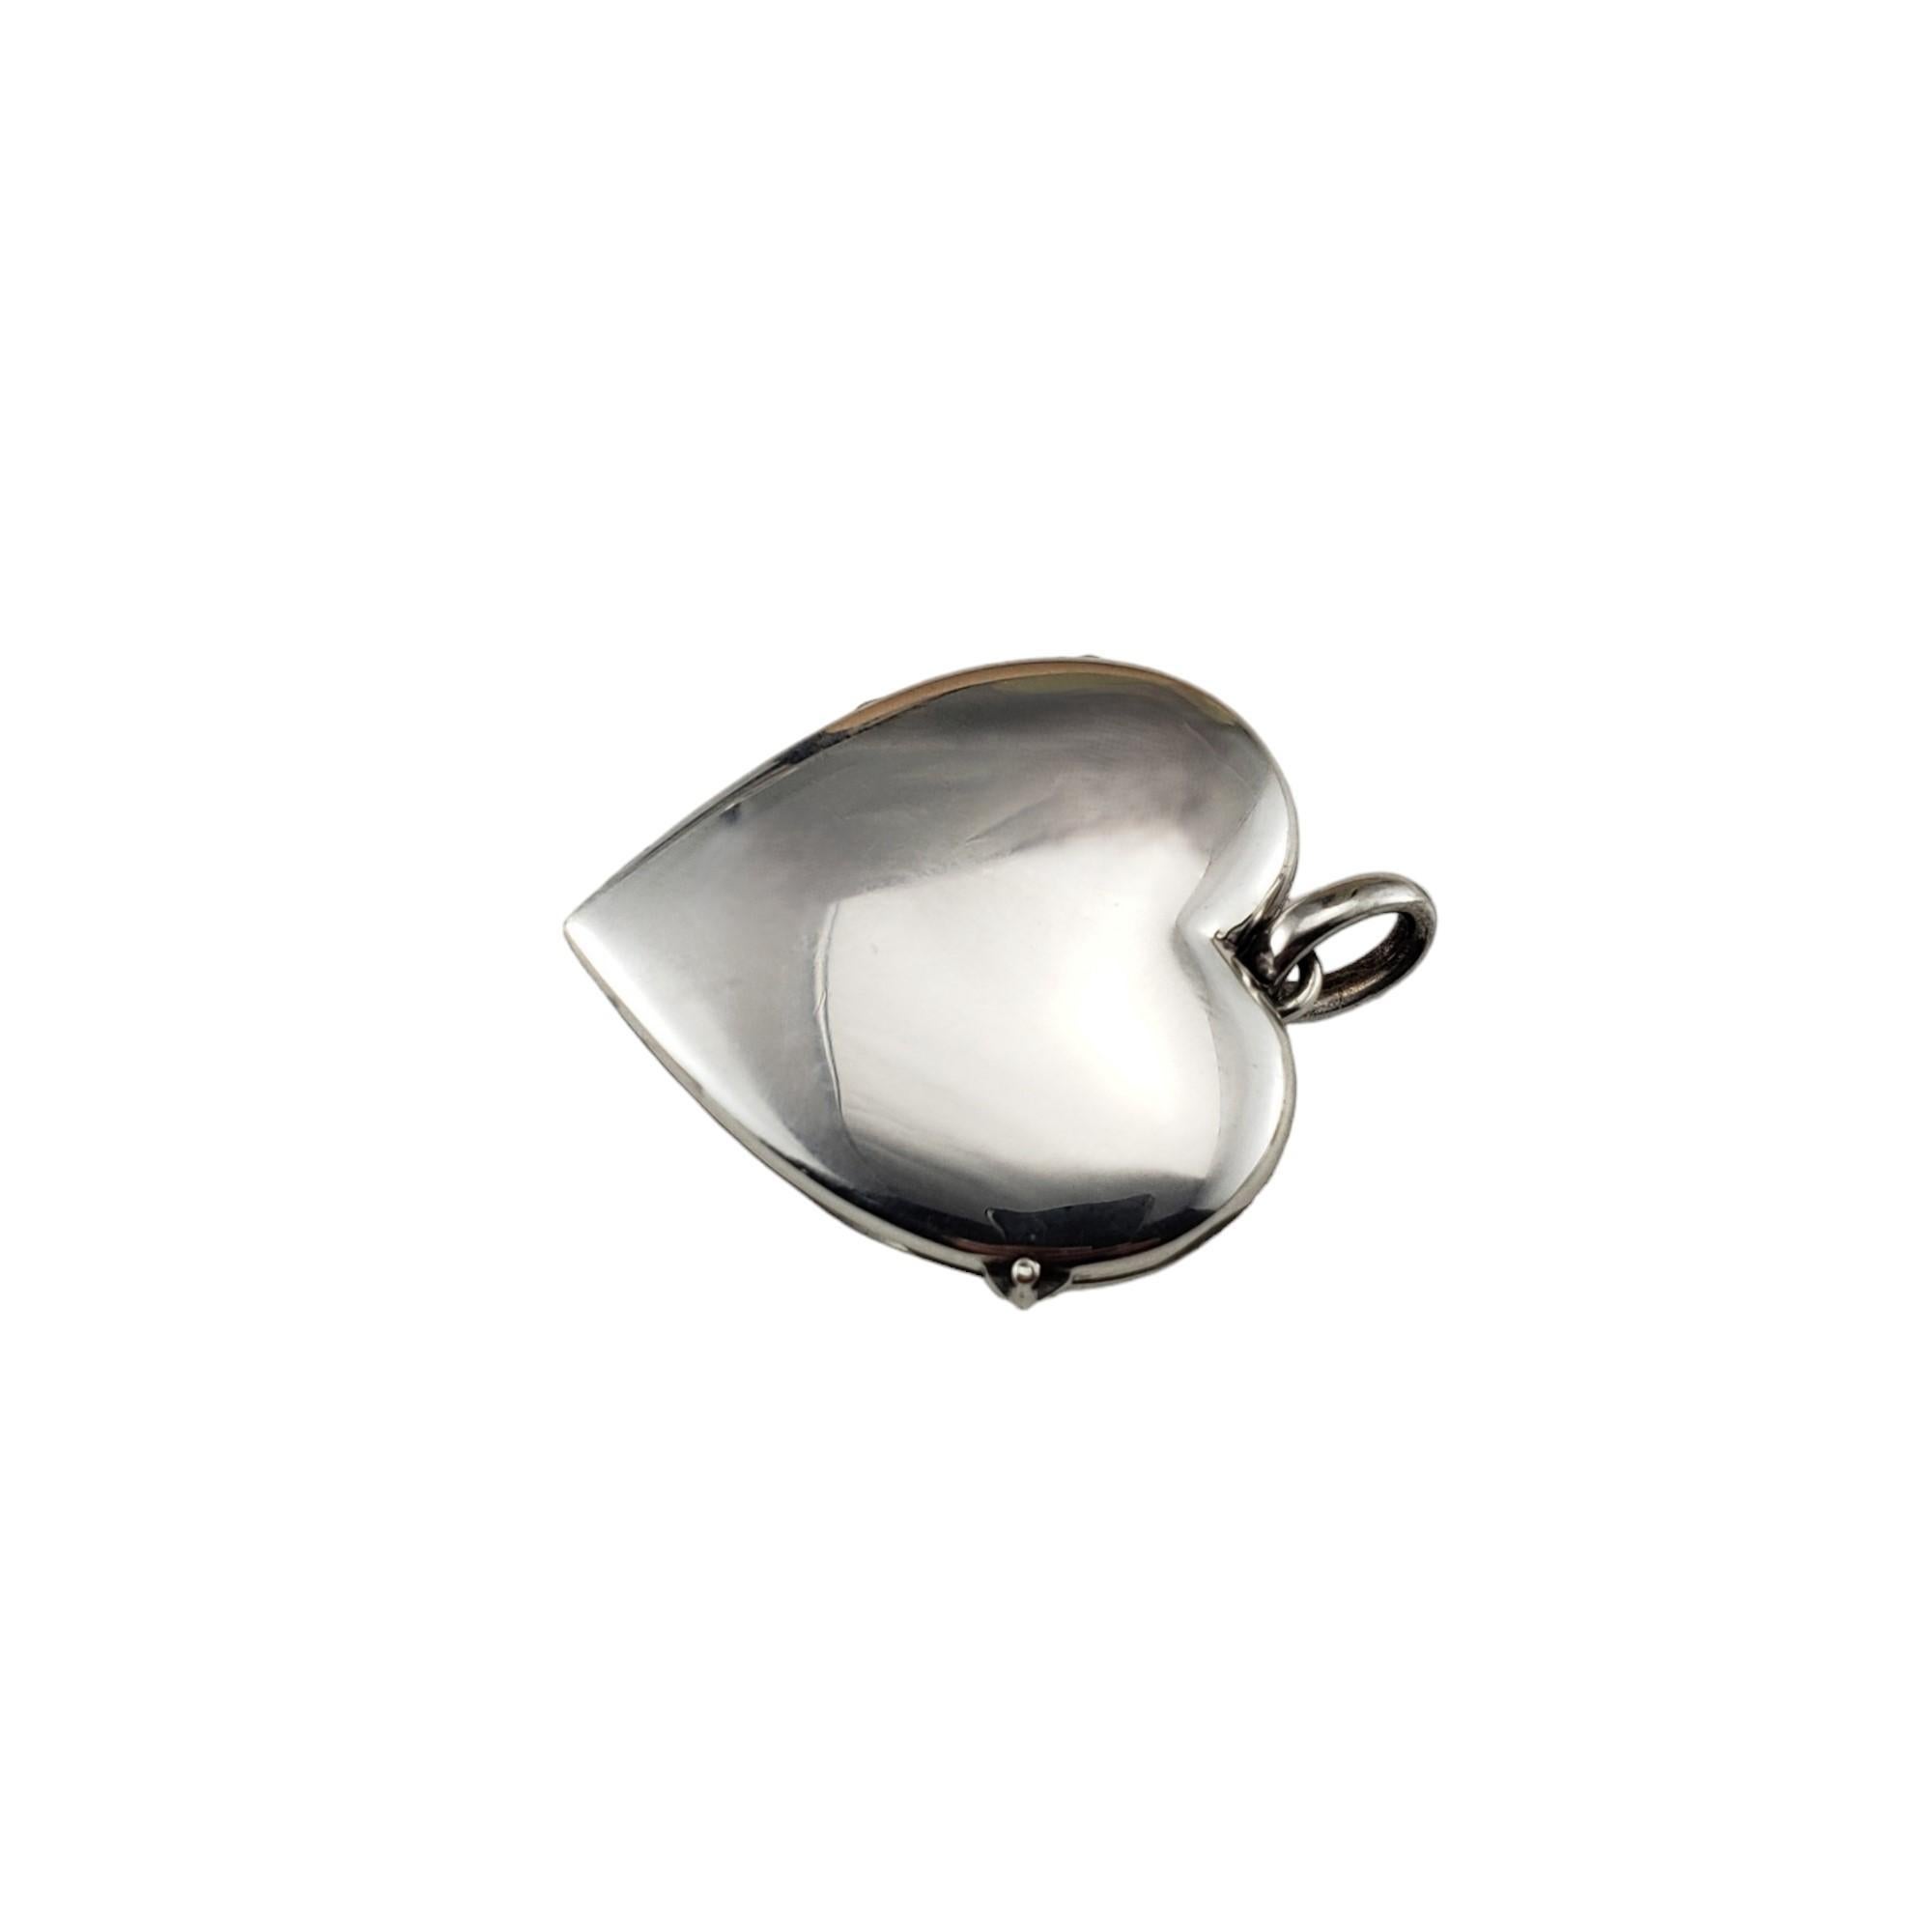 Vintage Tiffany & Co. Sterling Silver Heart Locket Pendant-

This stunning hinged heart locket by Tiffany & Co. is crafted in beautifully detailed sterling silver.  

Plastic for photo covers

Size: 37 mm x 35 mm

Hallmark: Tiffany & Co. Germany 